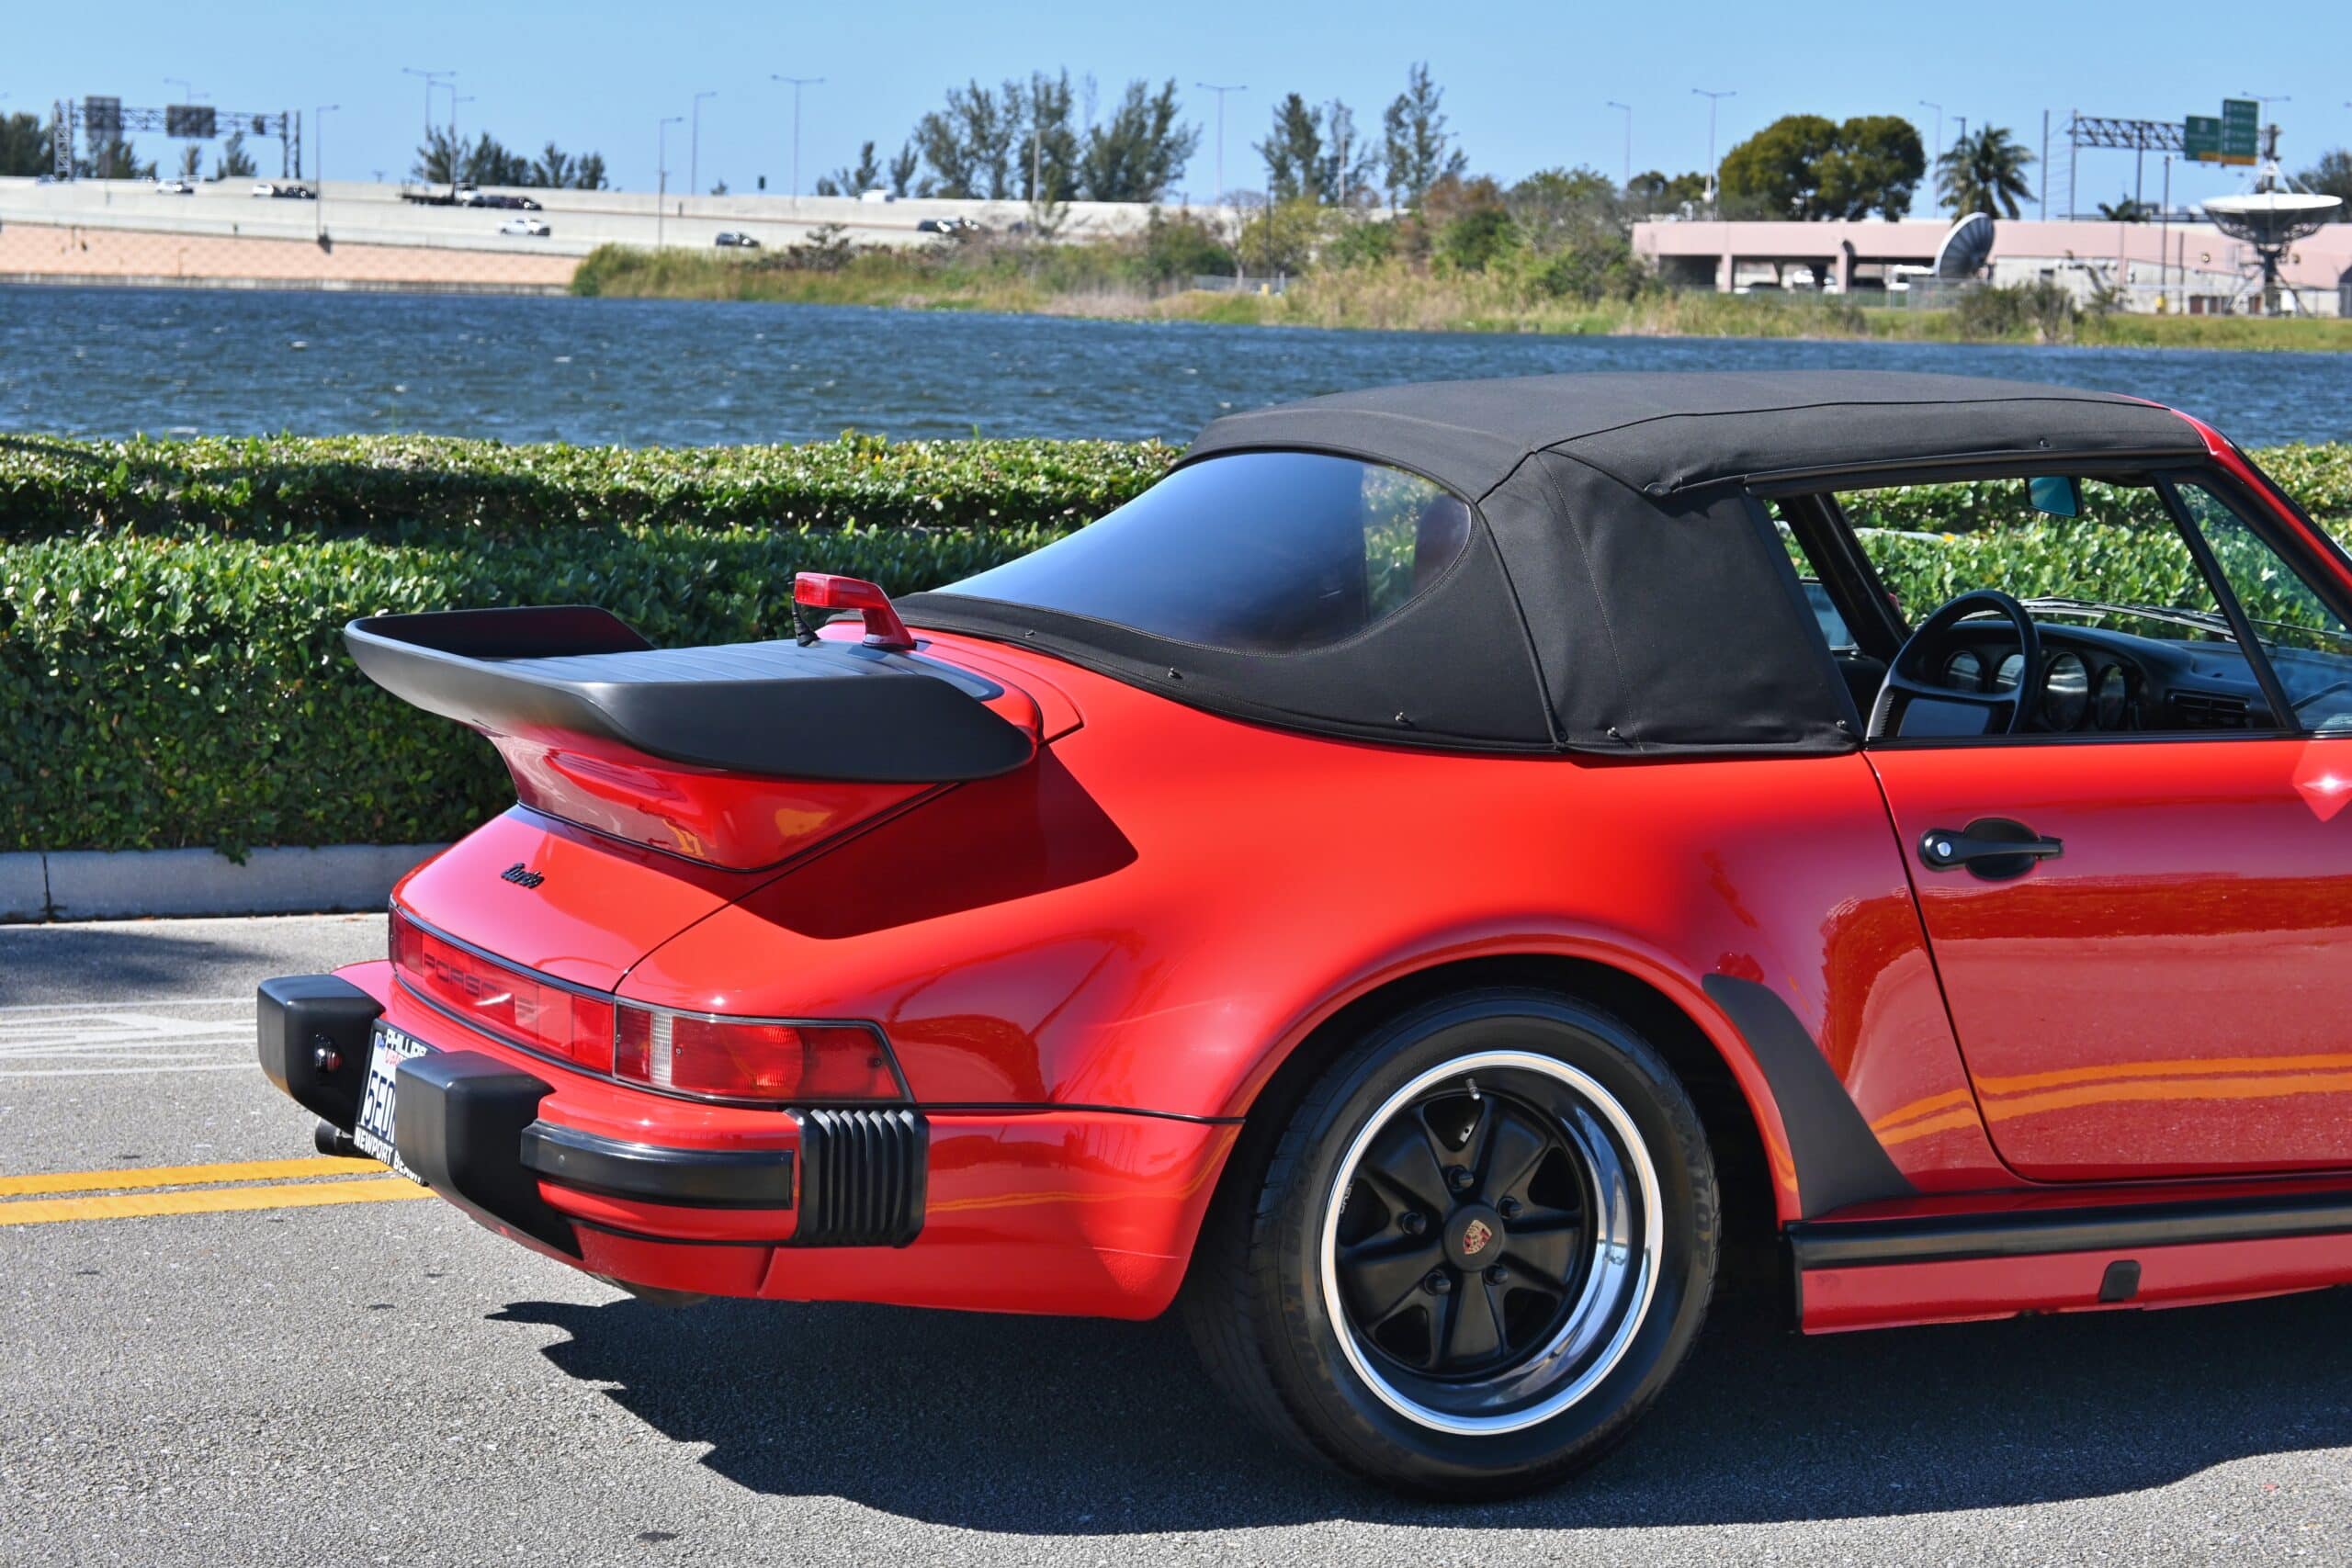 1989 Porsche 930 Turbo 911 California Car/Special Wishes Options/5 Speed/COA/ Engine Out Service/ Like New!